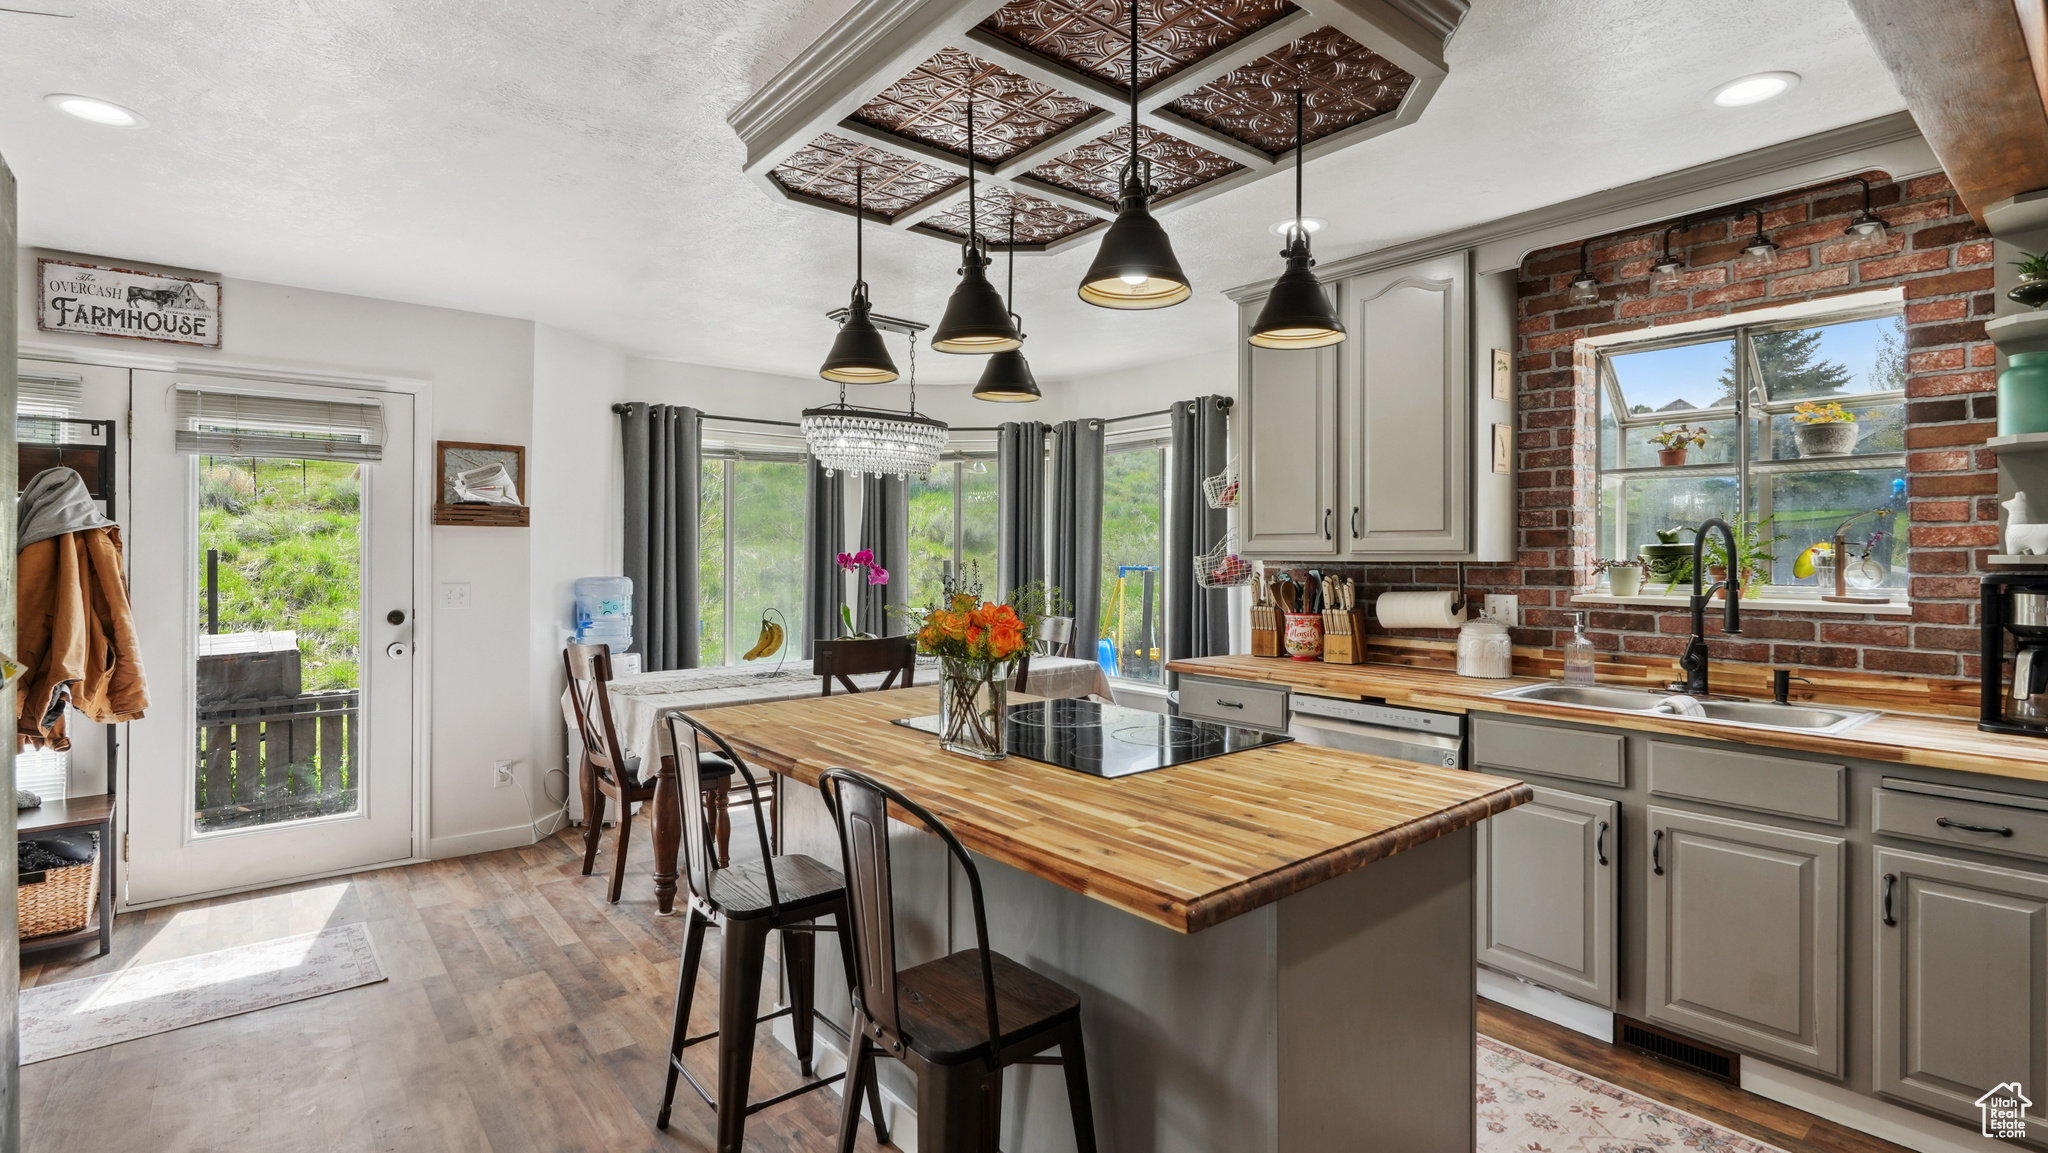 Kitchen featuring a center island, wooden counters, sink, gray cabinets, and pendant lighting